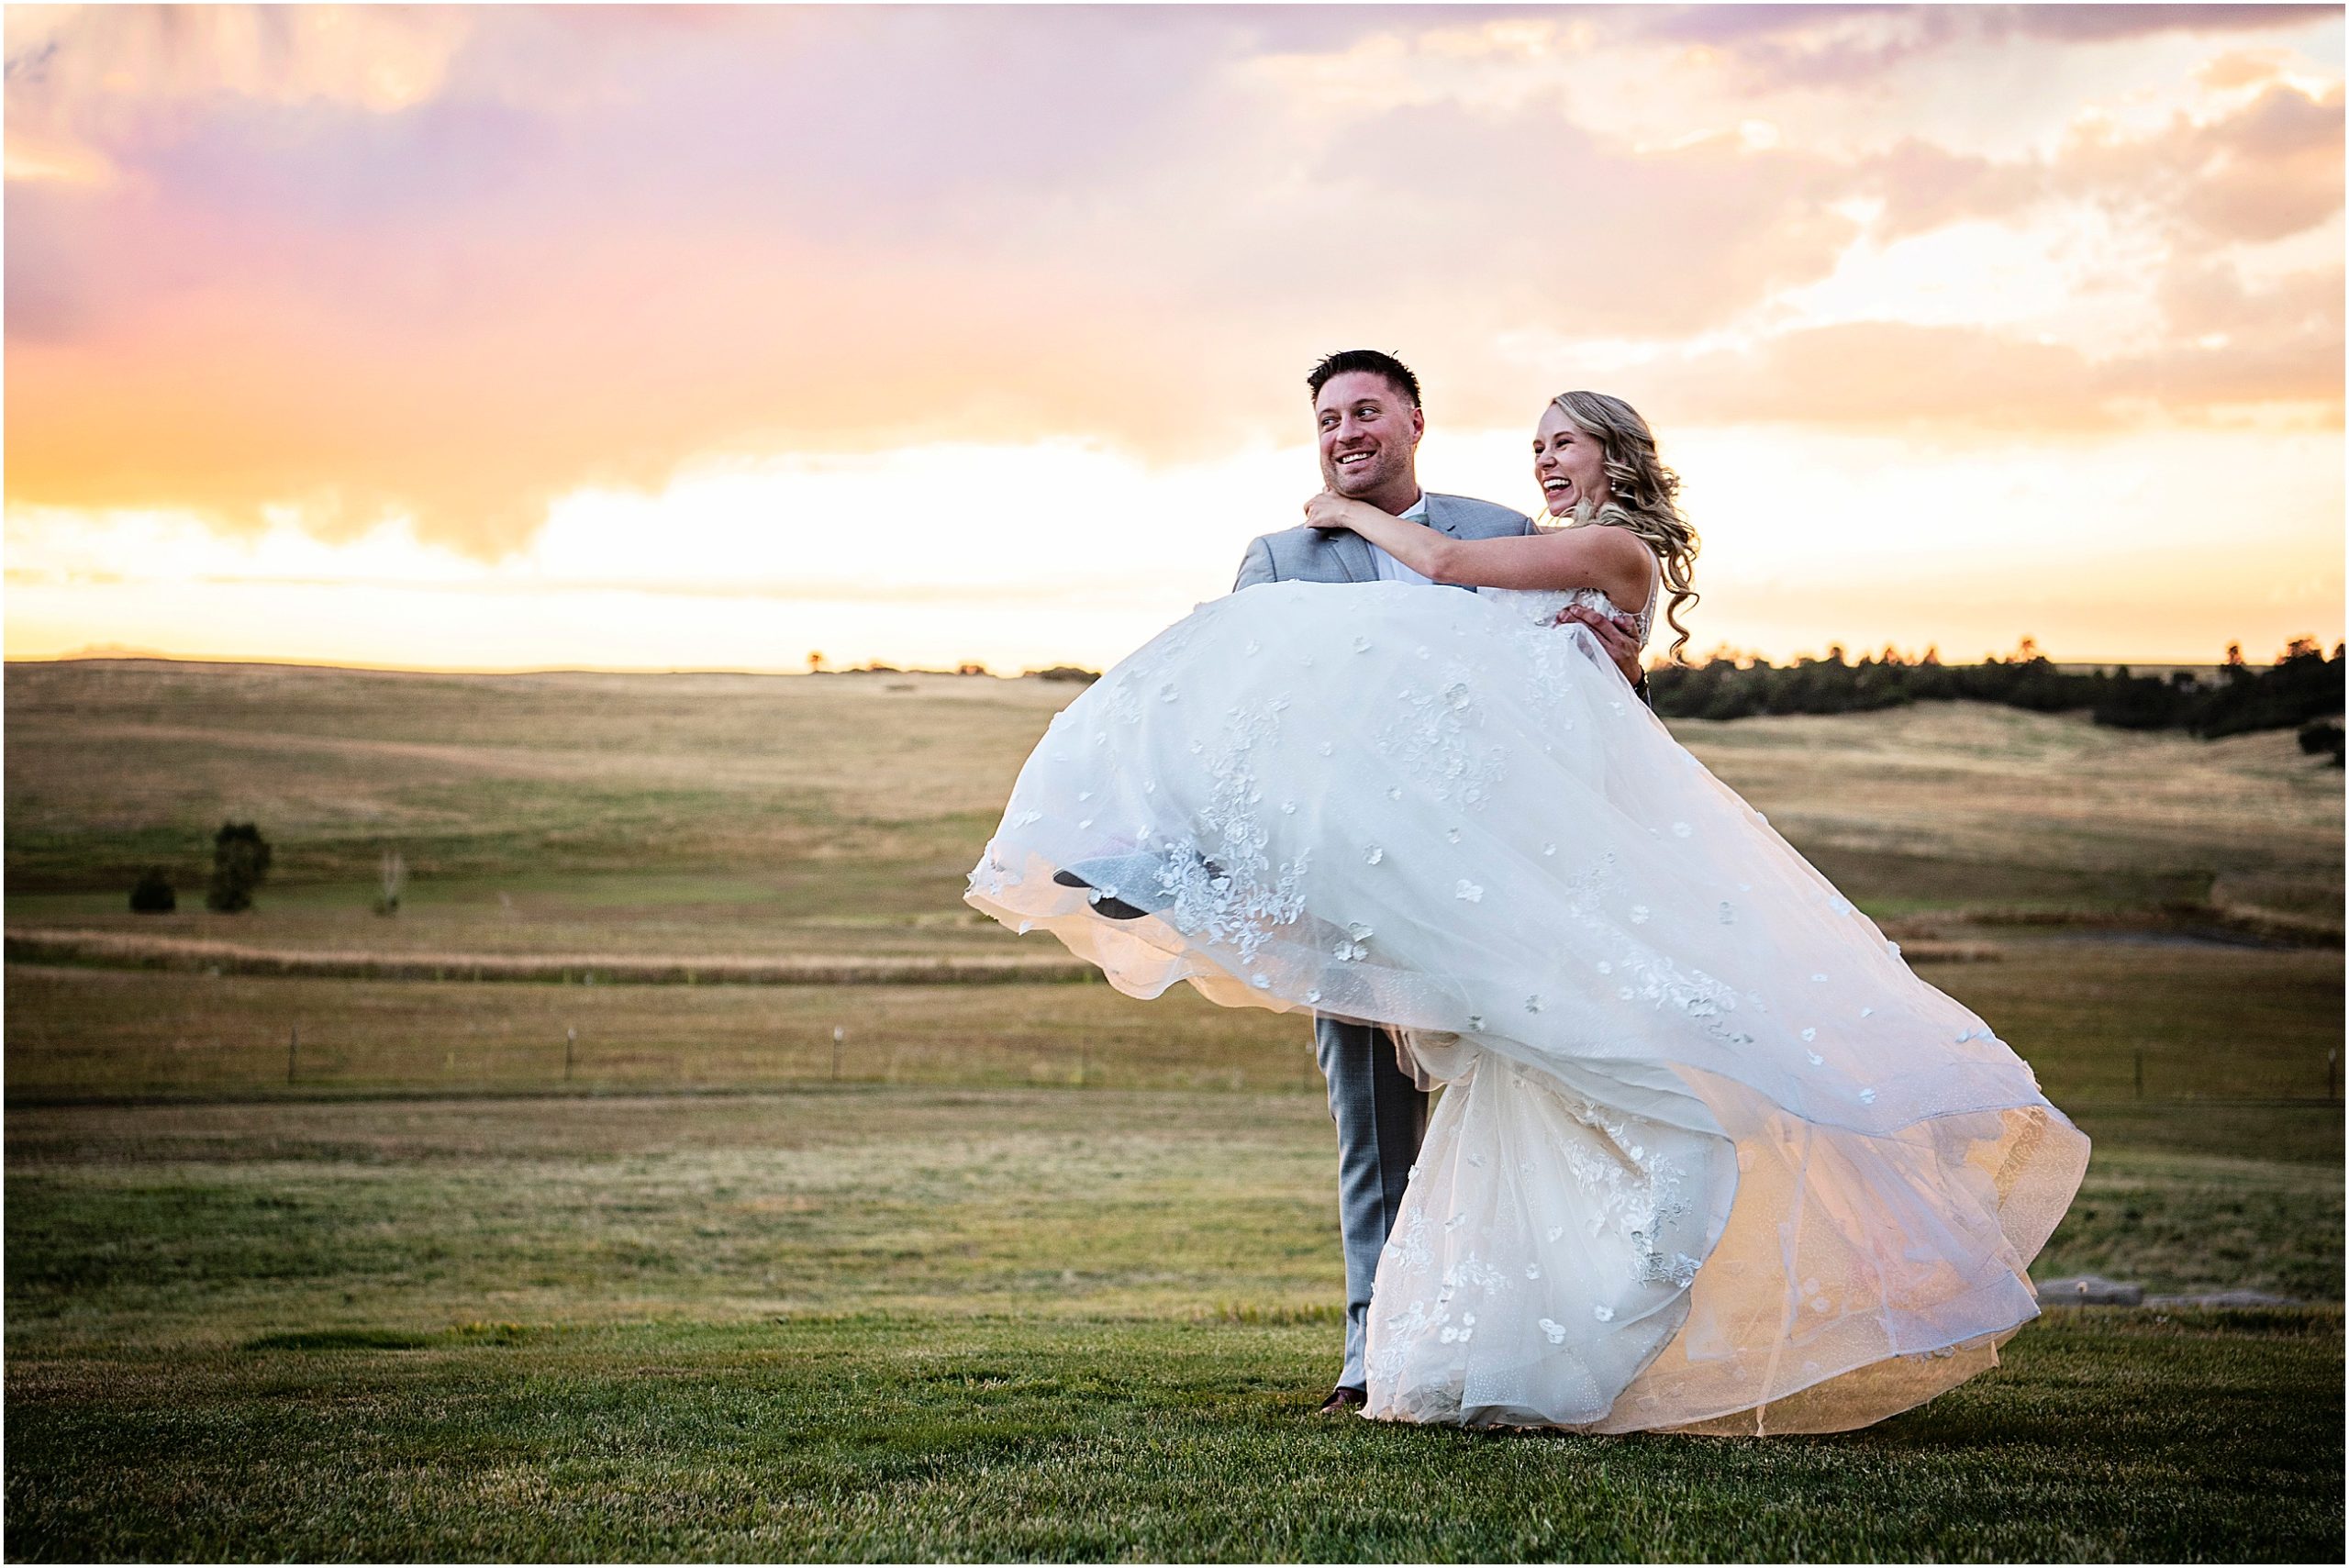 Groom carries his bride in a field at sunset in colorado at their wedding